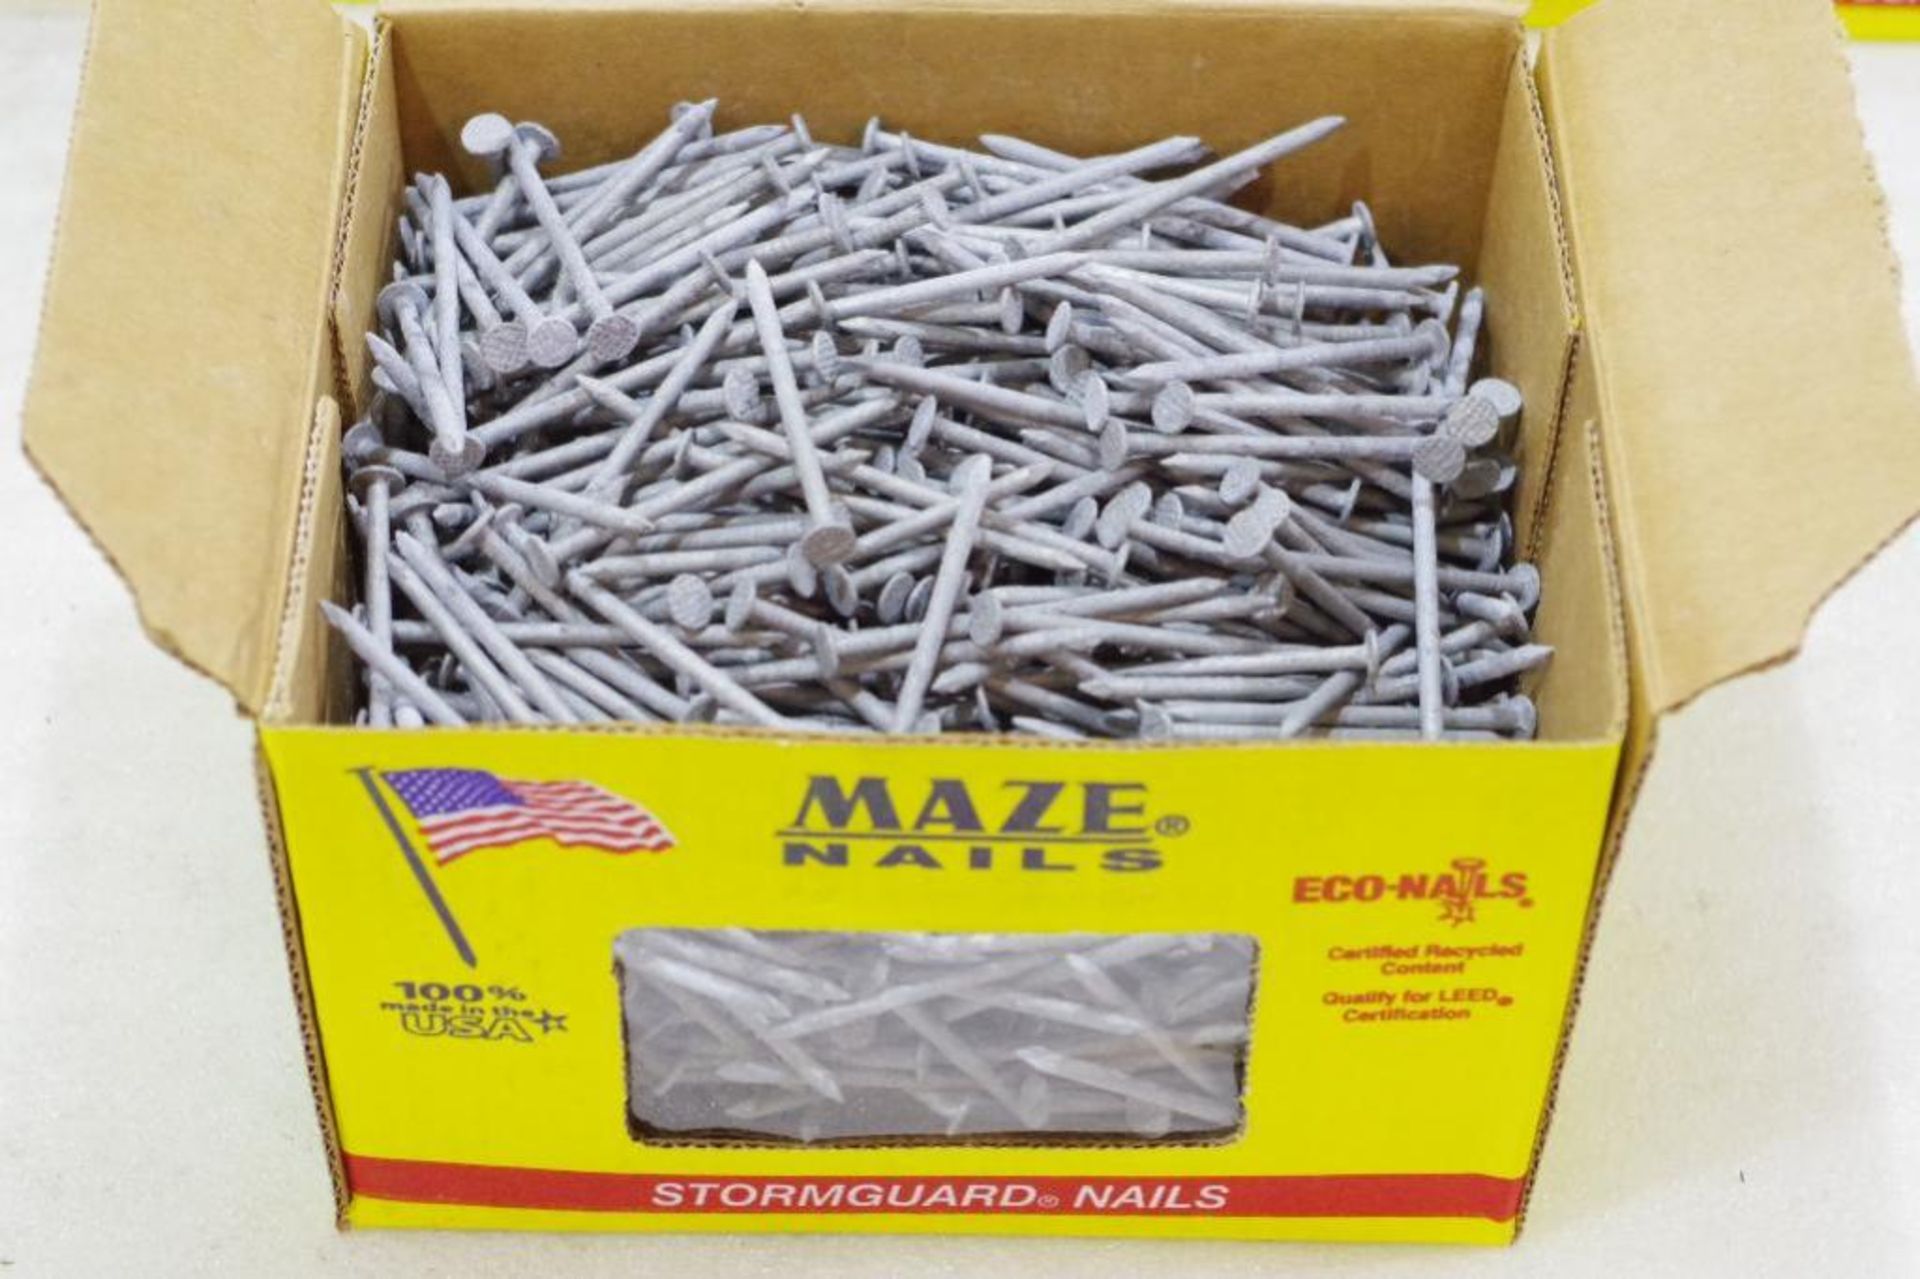 (30) Lbs. MAZE Stormguard Hot-Dip Galvanized Box Nail 2" 6d M/N S205, Made in USA (6 Boxes 5 Lbs.) - Image 6 of 7